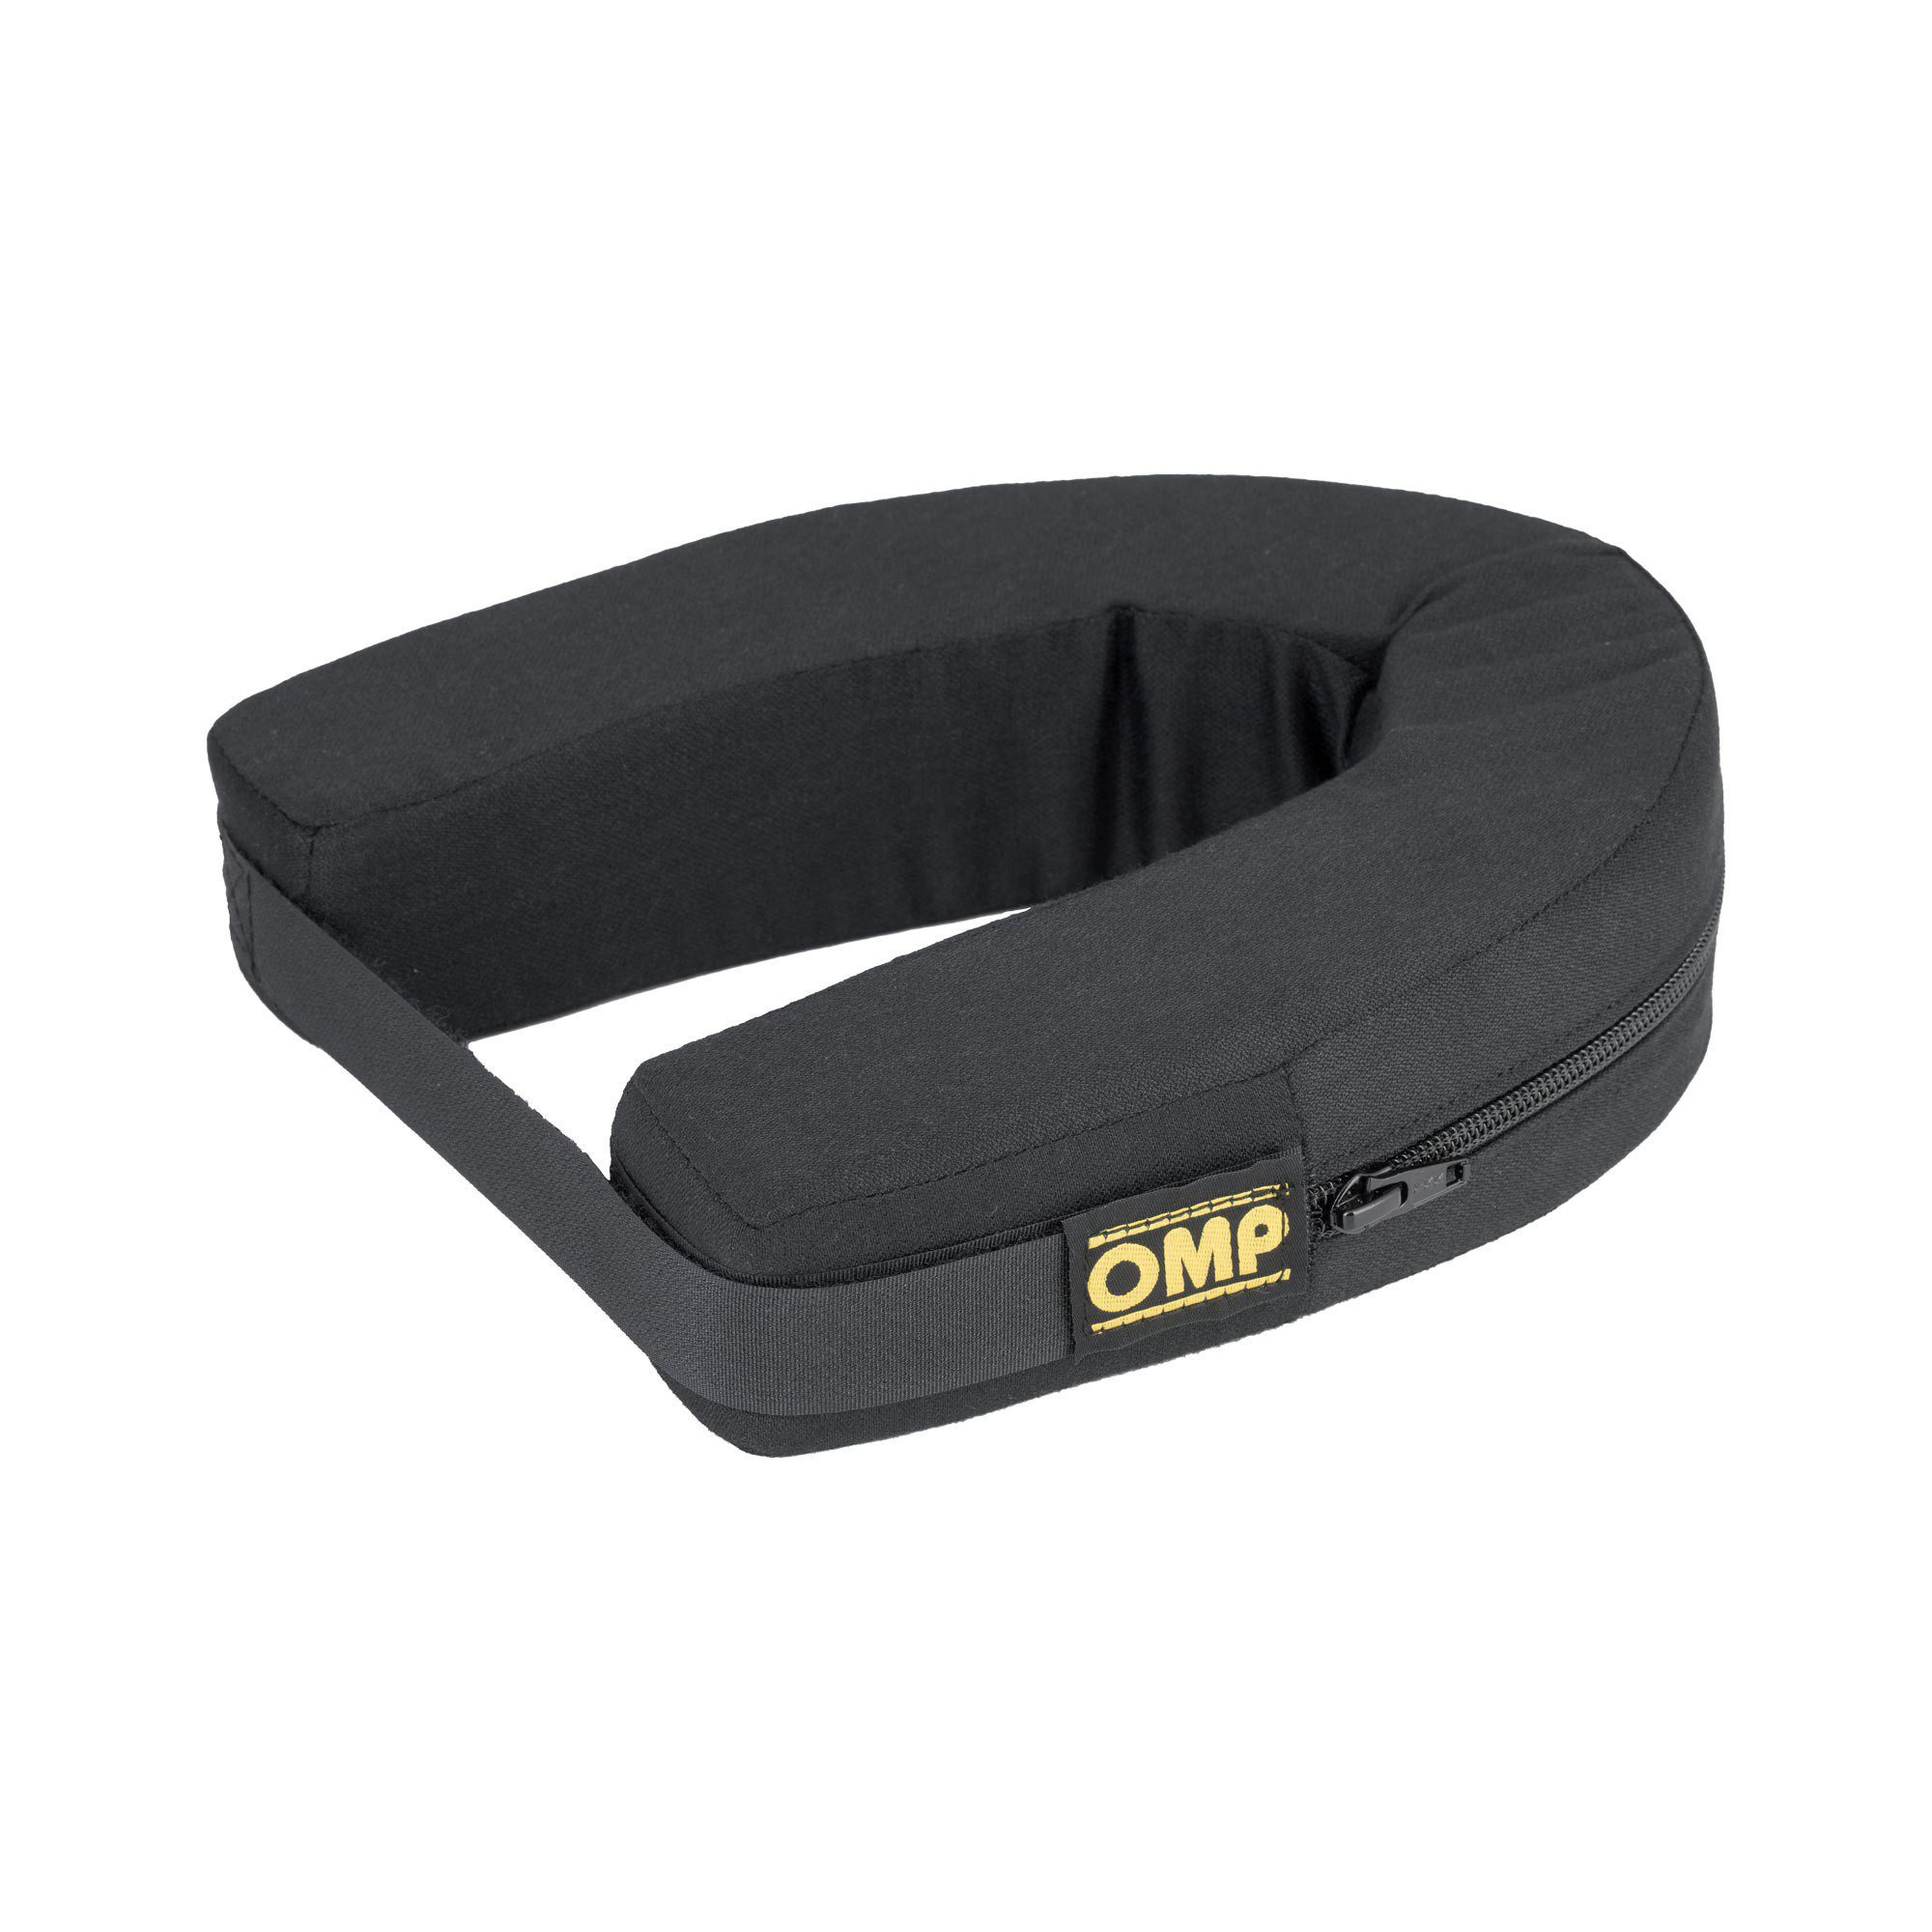 OMP Nomex Neck Support